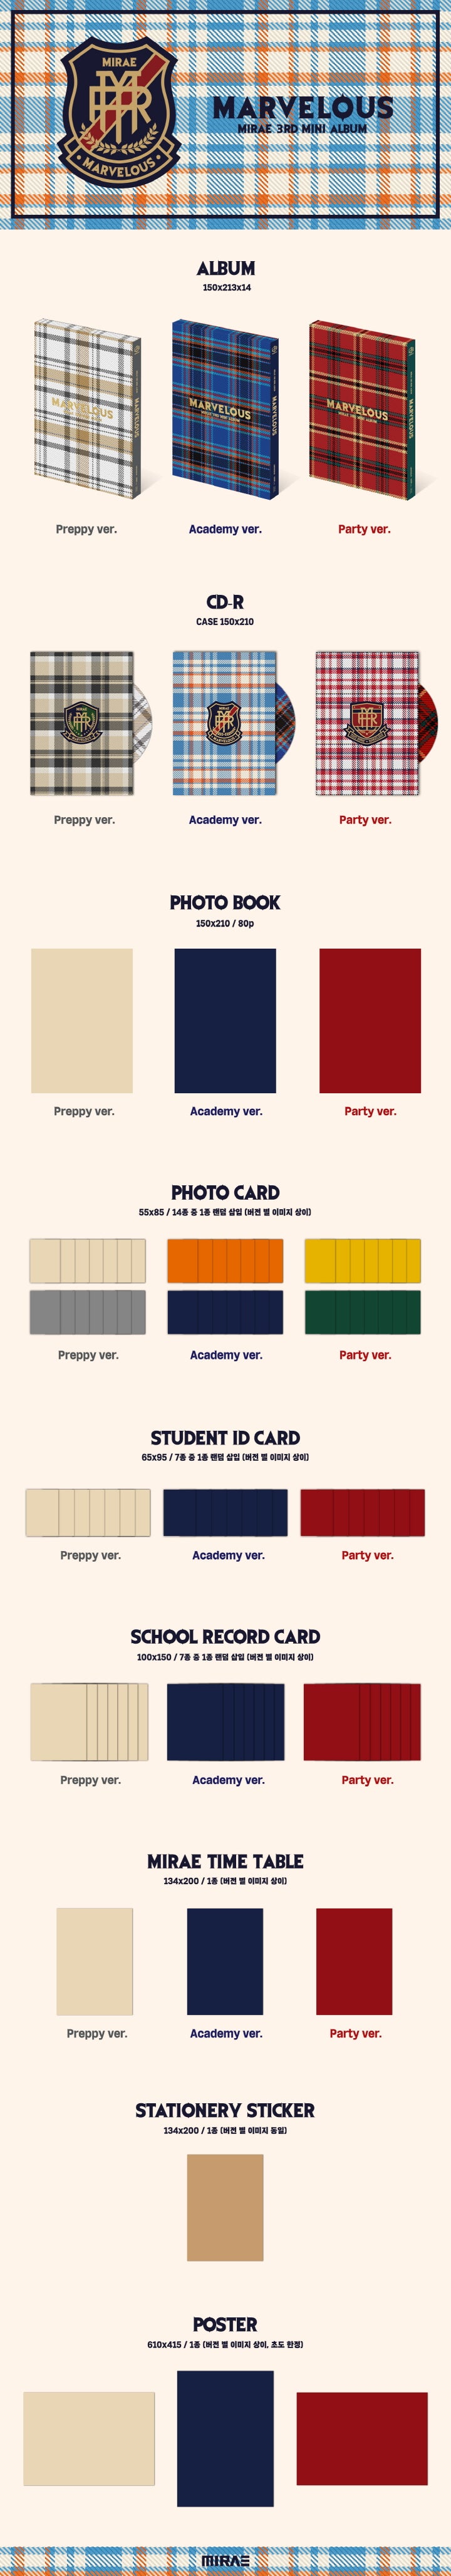 1 CD
1 Photo Book (80 pages)
1 Photo Card (random out of 14 pages)
1 Student ID Card (random out of 7 types)
1 School Reco...